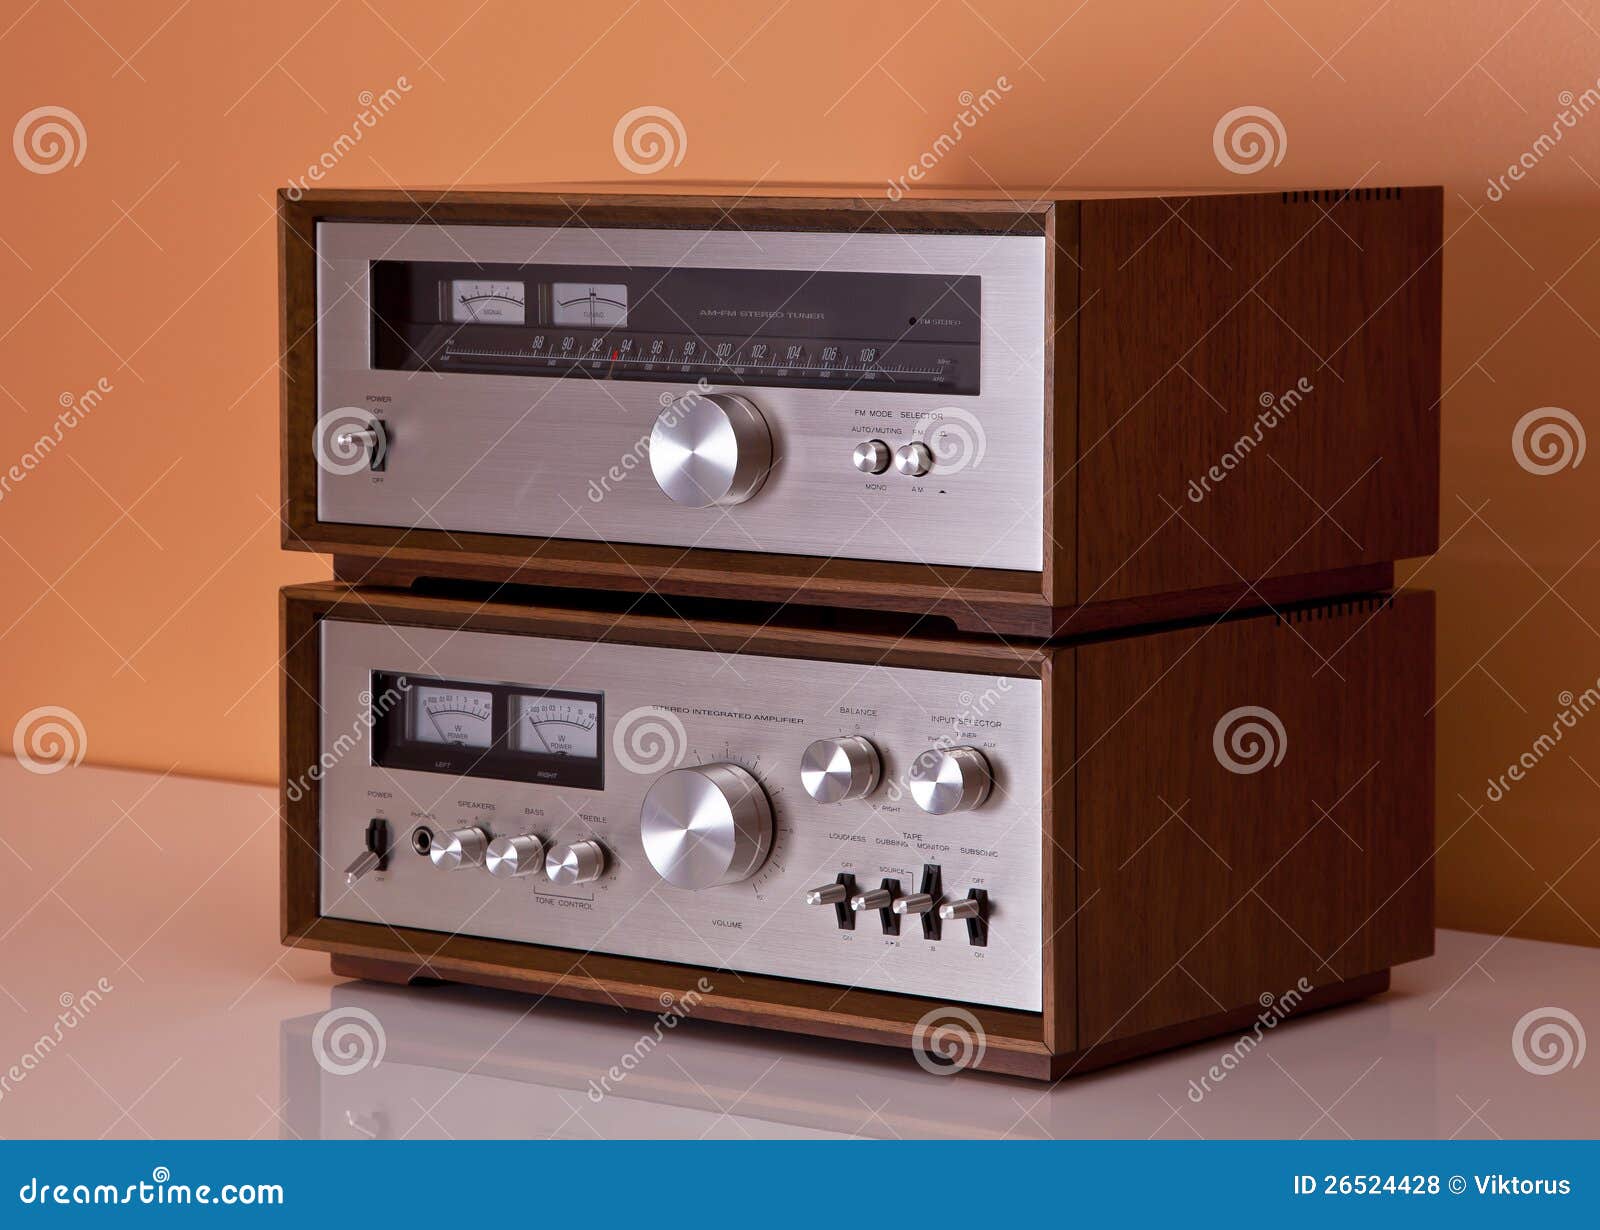 Free Cabinets Vintage Wooden  cabinets   Amplifier Stock Royalty Tuner wooden vintage And Stereo